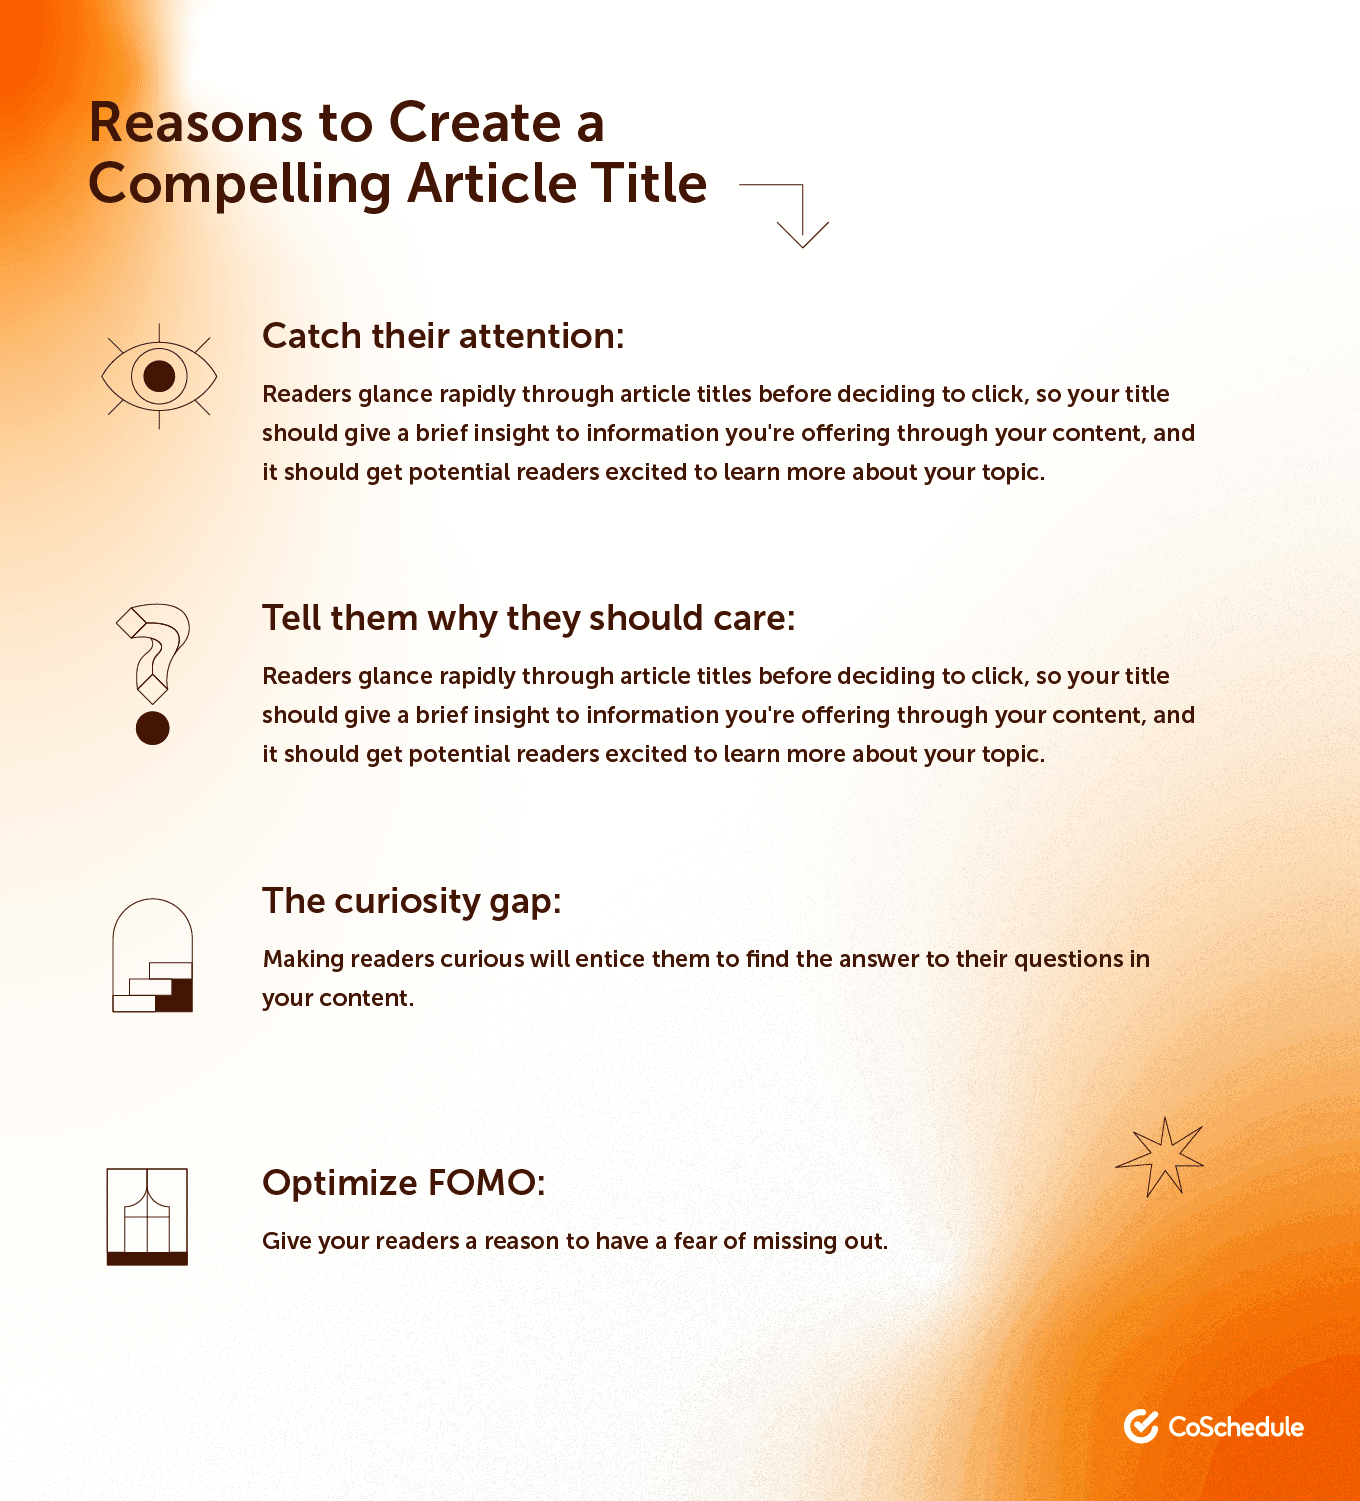 Reasons to Create a Compelling Article Title